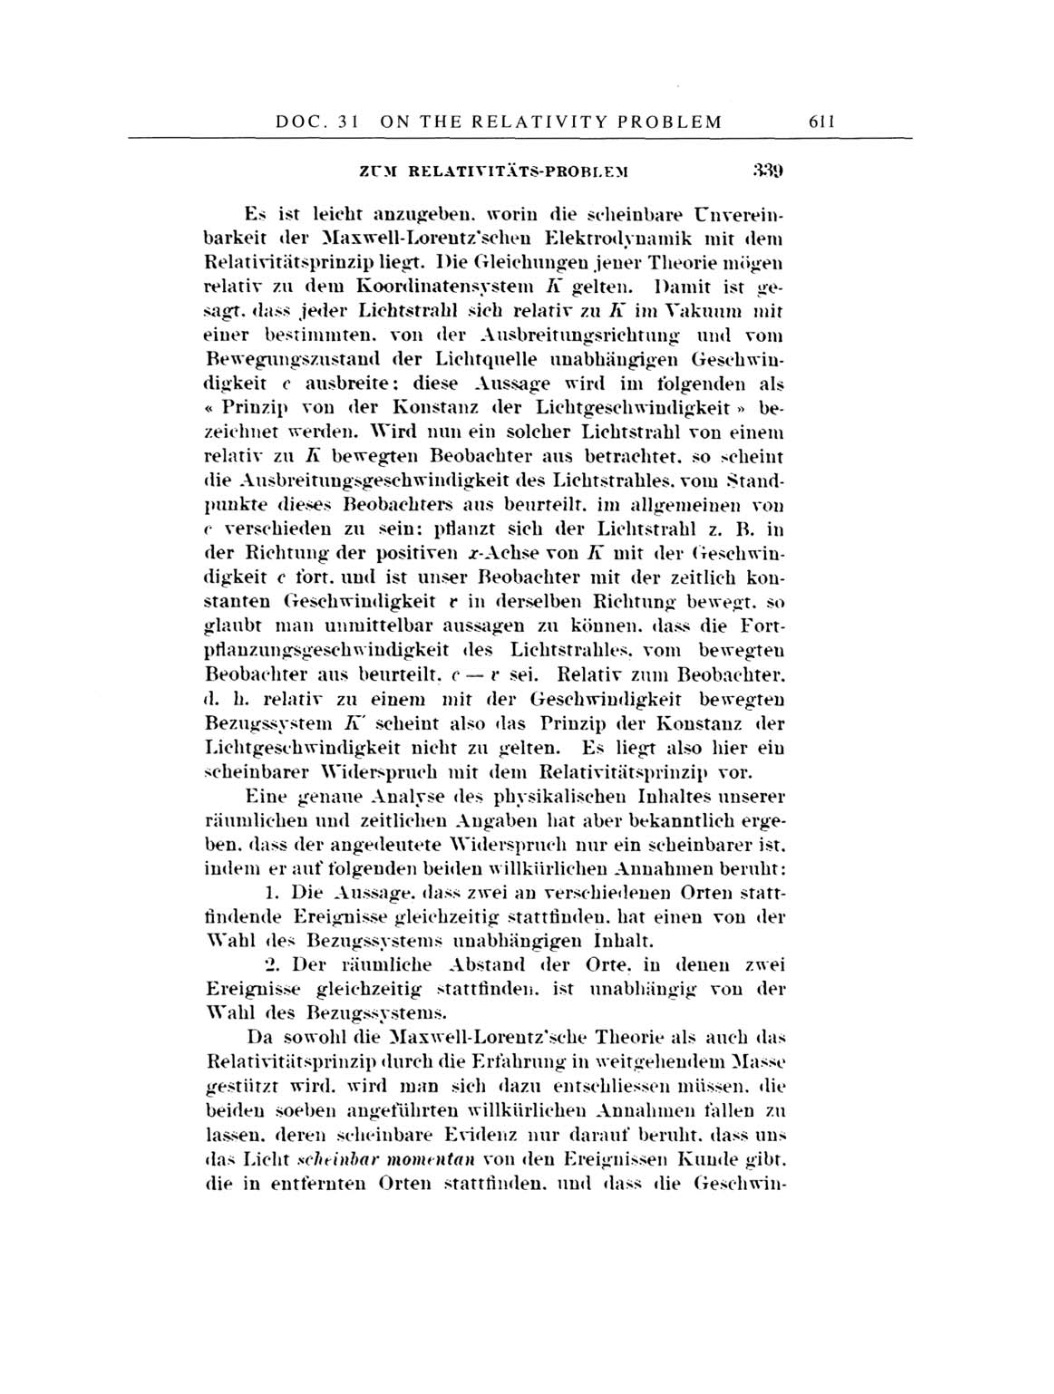 Volume 4: The Swiss Years: Writings 1912-1914 page 611